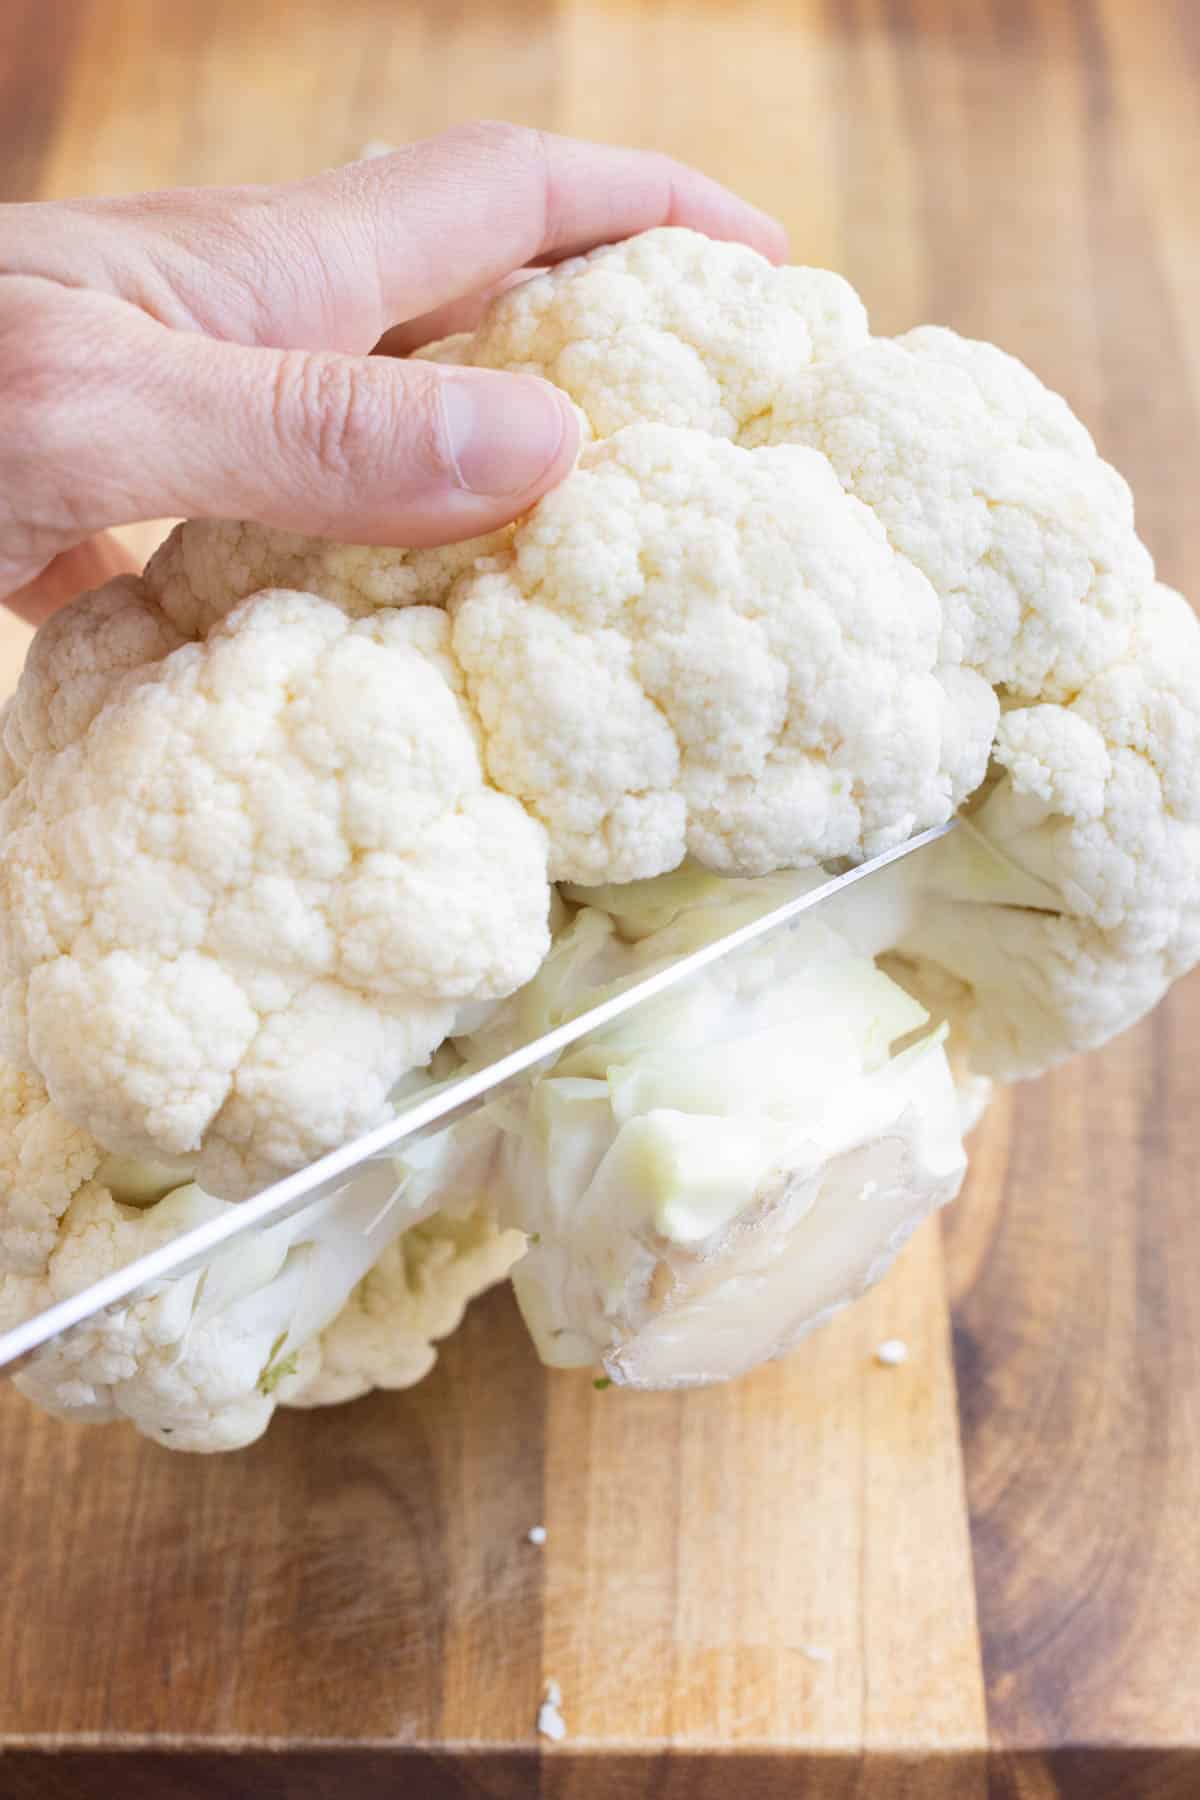 A knife cuts away the bulky stalk from the cauliflower.